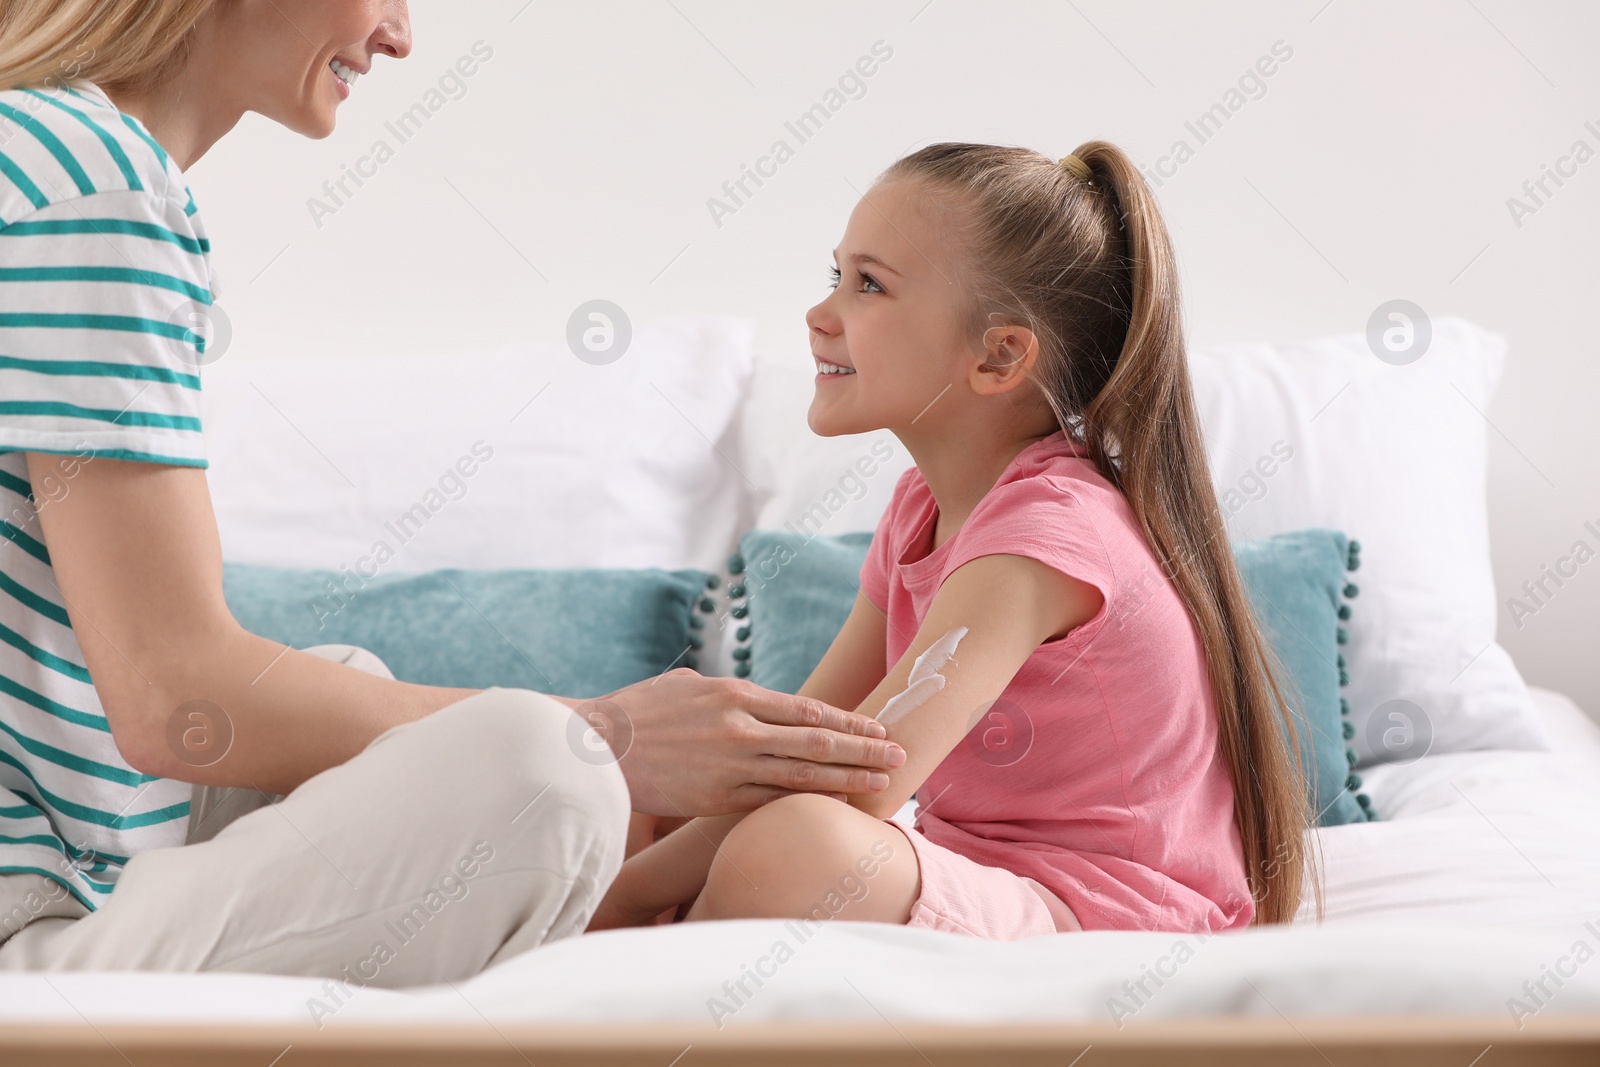 Photo of Mother applying ointment onto her daughter's hand on bed